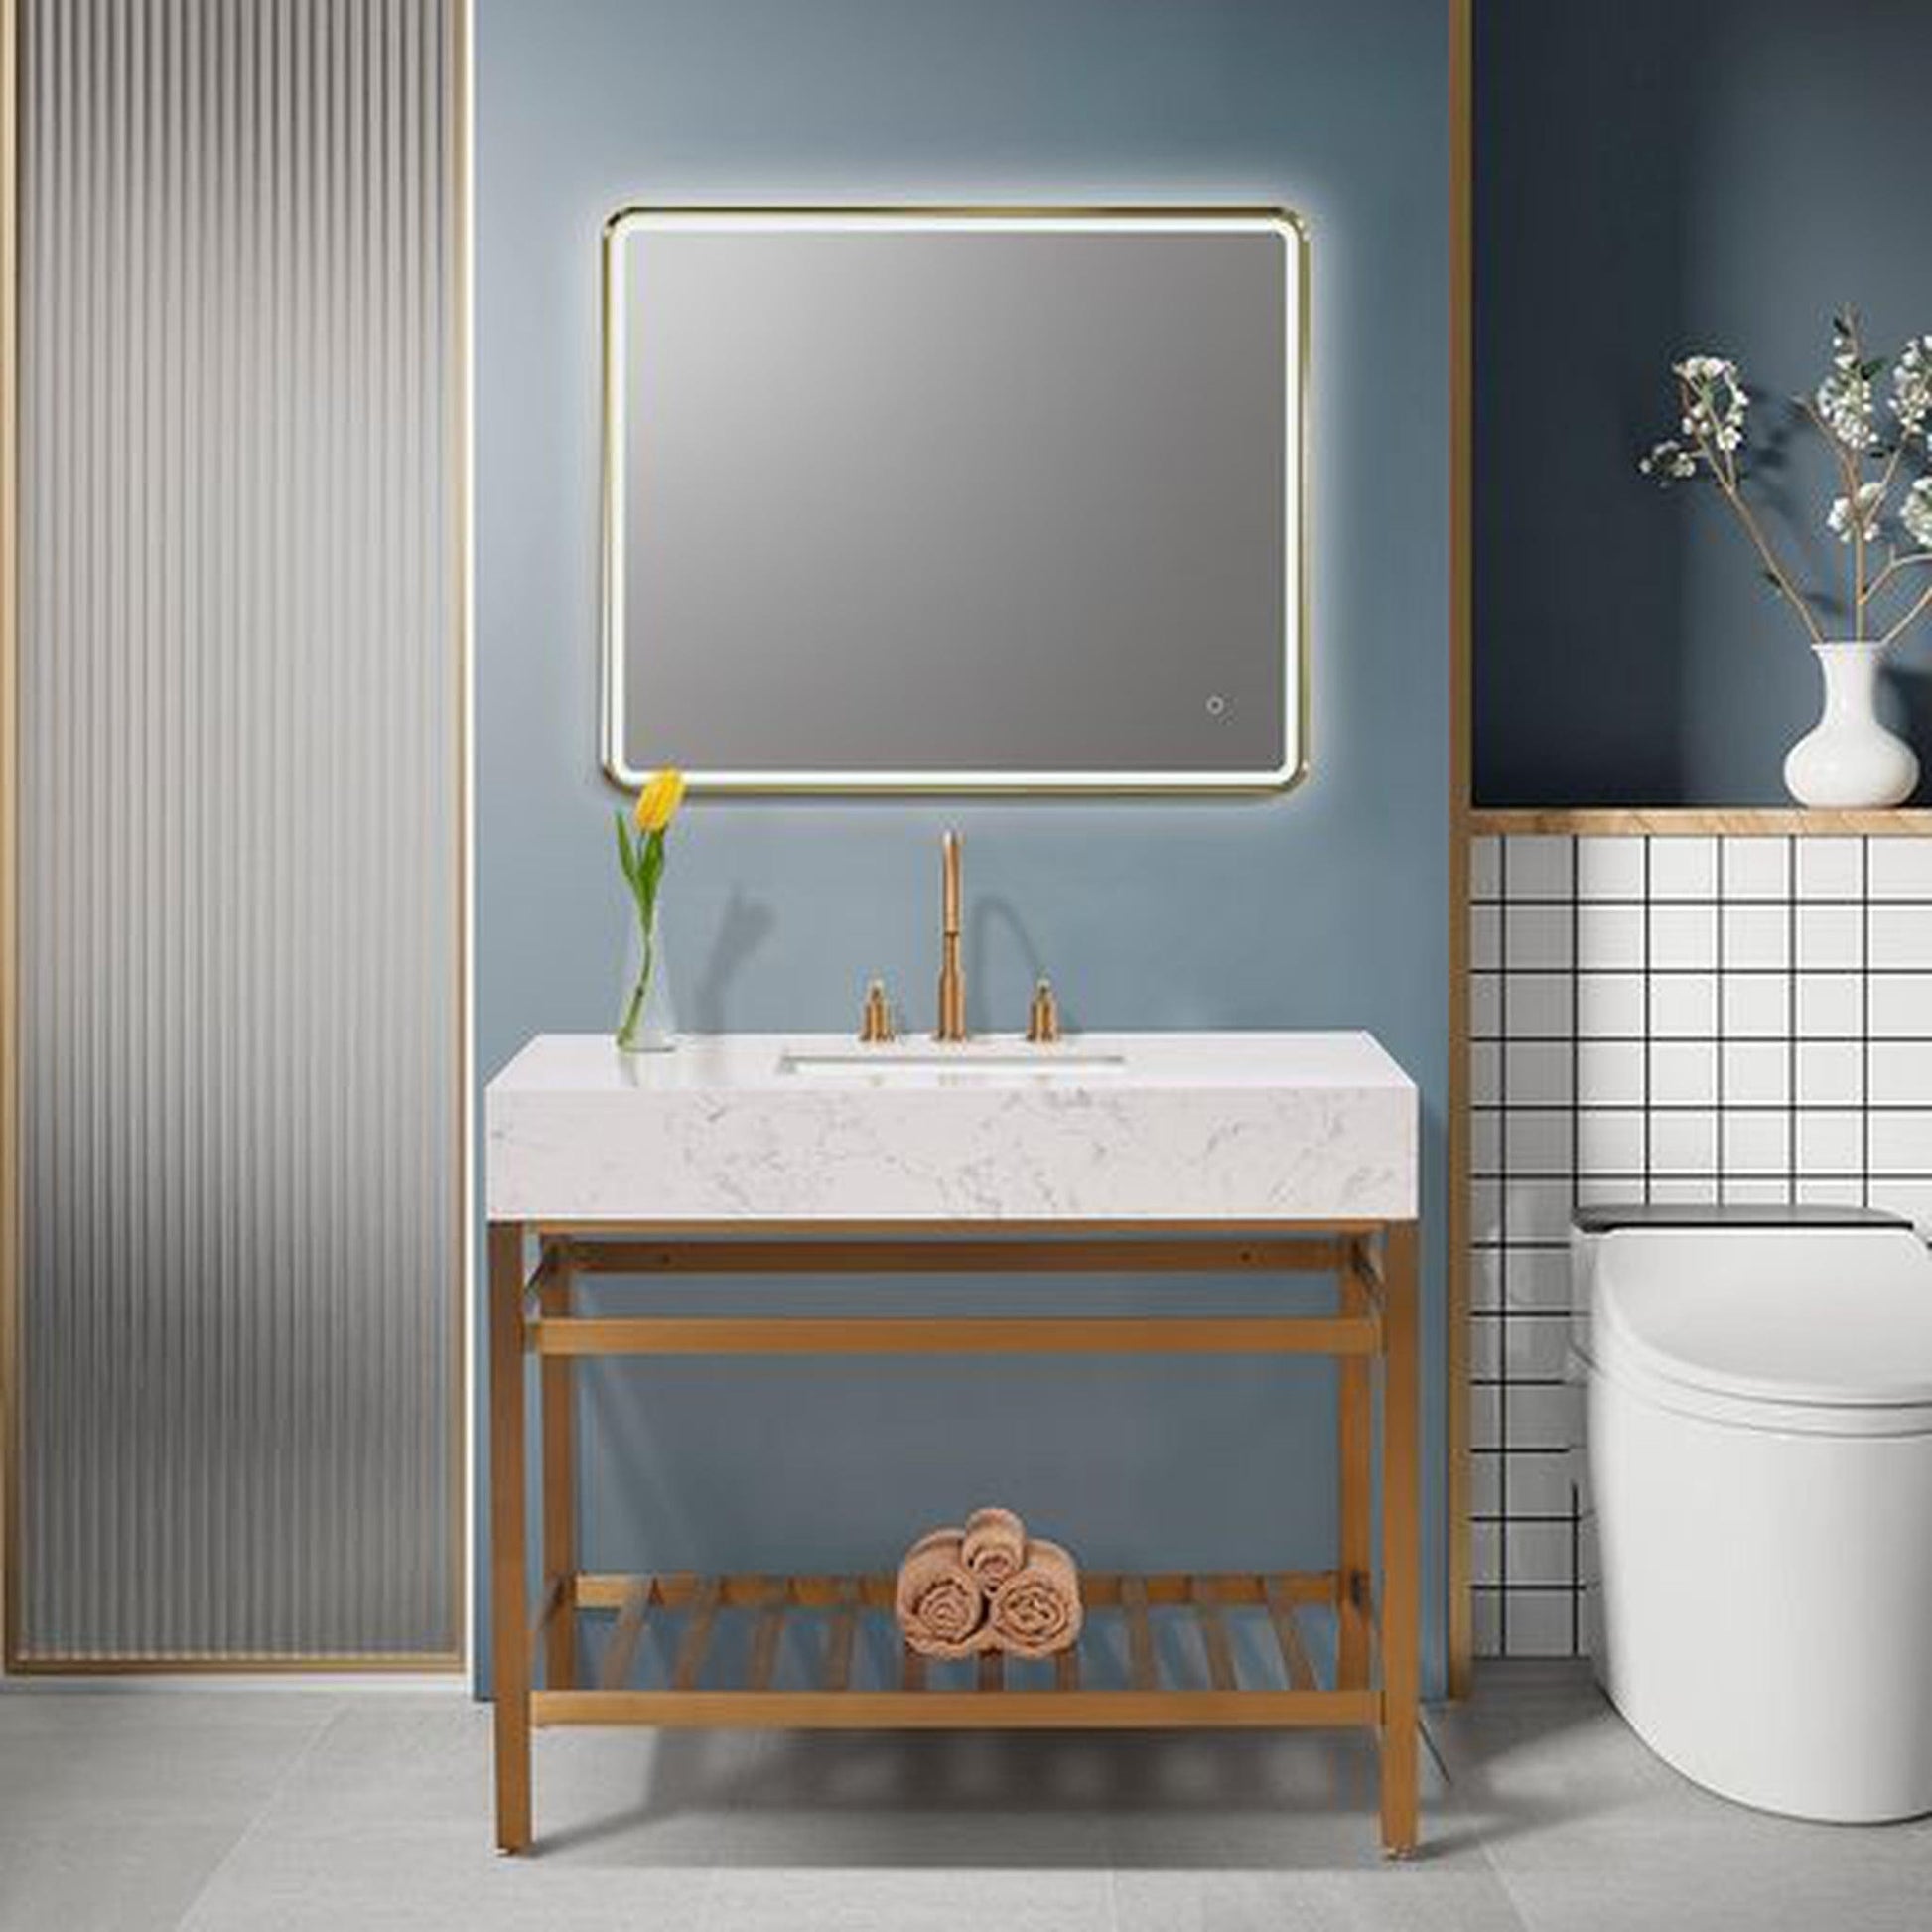 Altair Merano 42" Brushed Gold Single Stainless Steel Bathroom Vanity Set Console With Mirror, Aosta White Stone Top, Single Rectangular Undermount Ceramic Sink, and Safety Overflow Hole